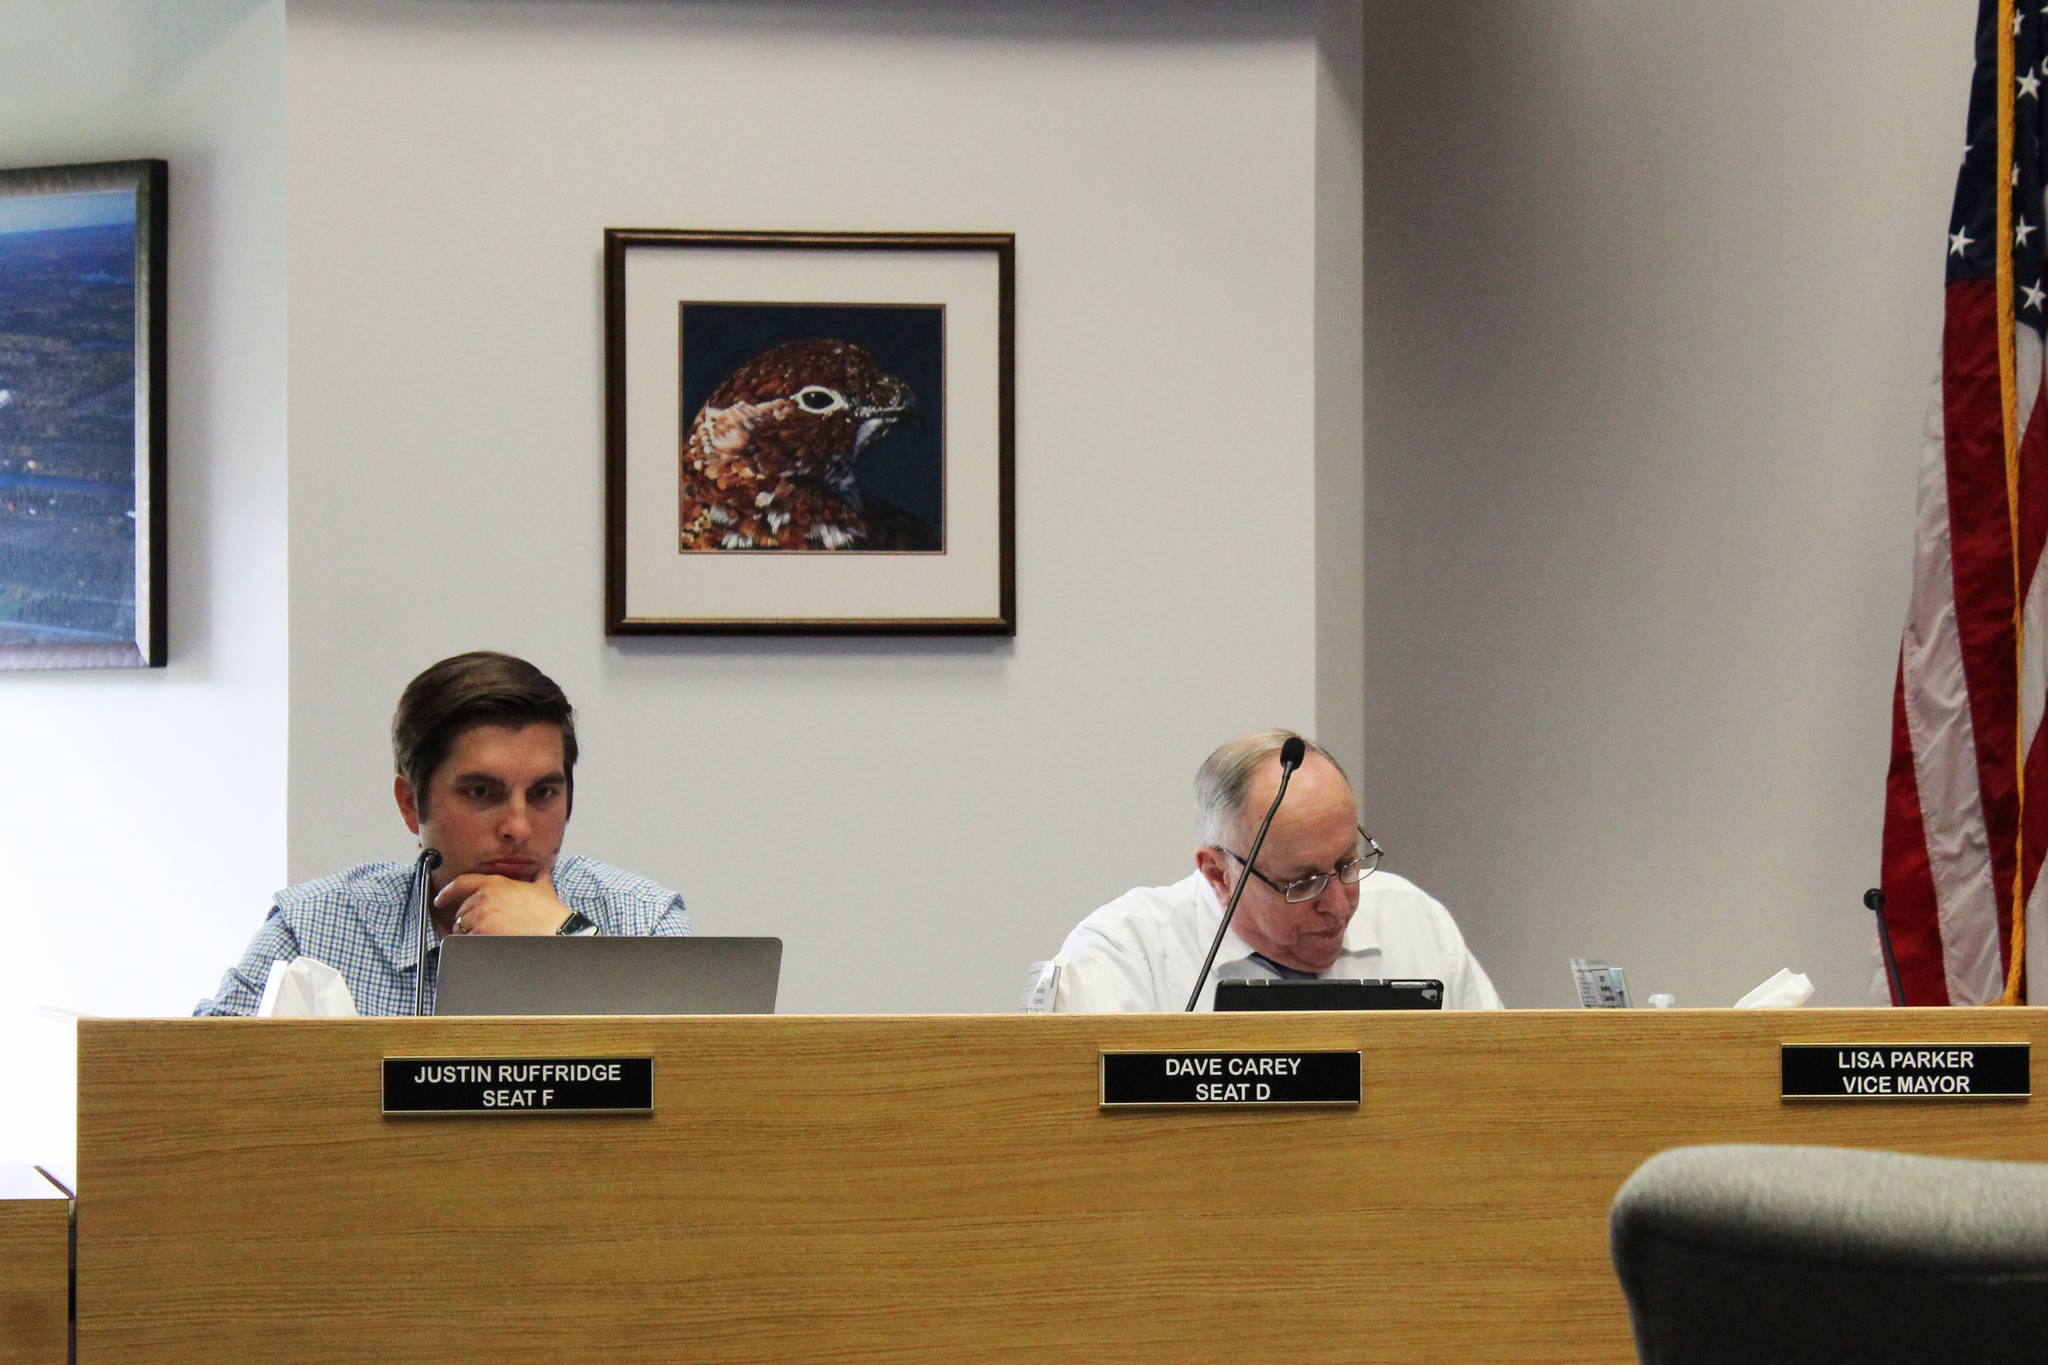 Justin Ruffridge and Dave Carrey attend a meeting of the Soldotna City Council on Wednesday, July 28, 2021 in Soldotna, Alaska. (Ashlyn O’Hara/Peninsula Clarion)